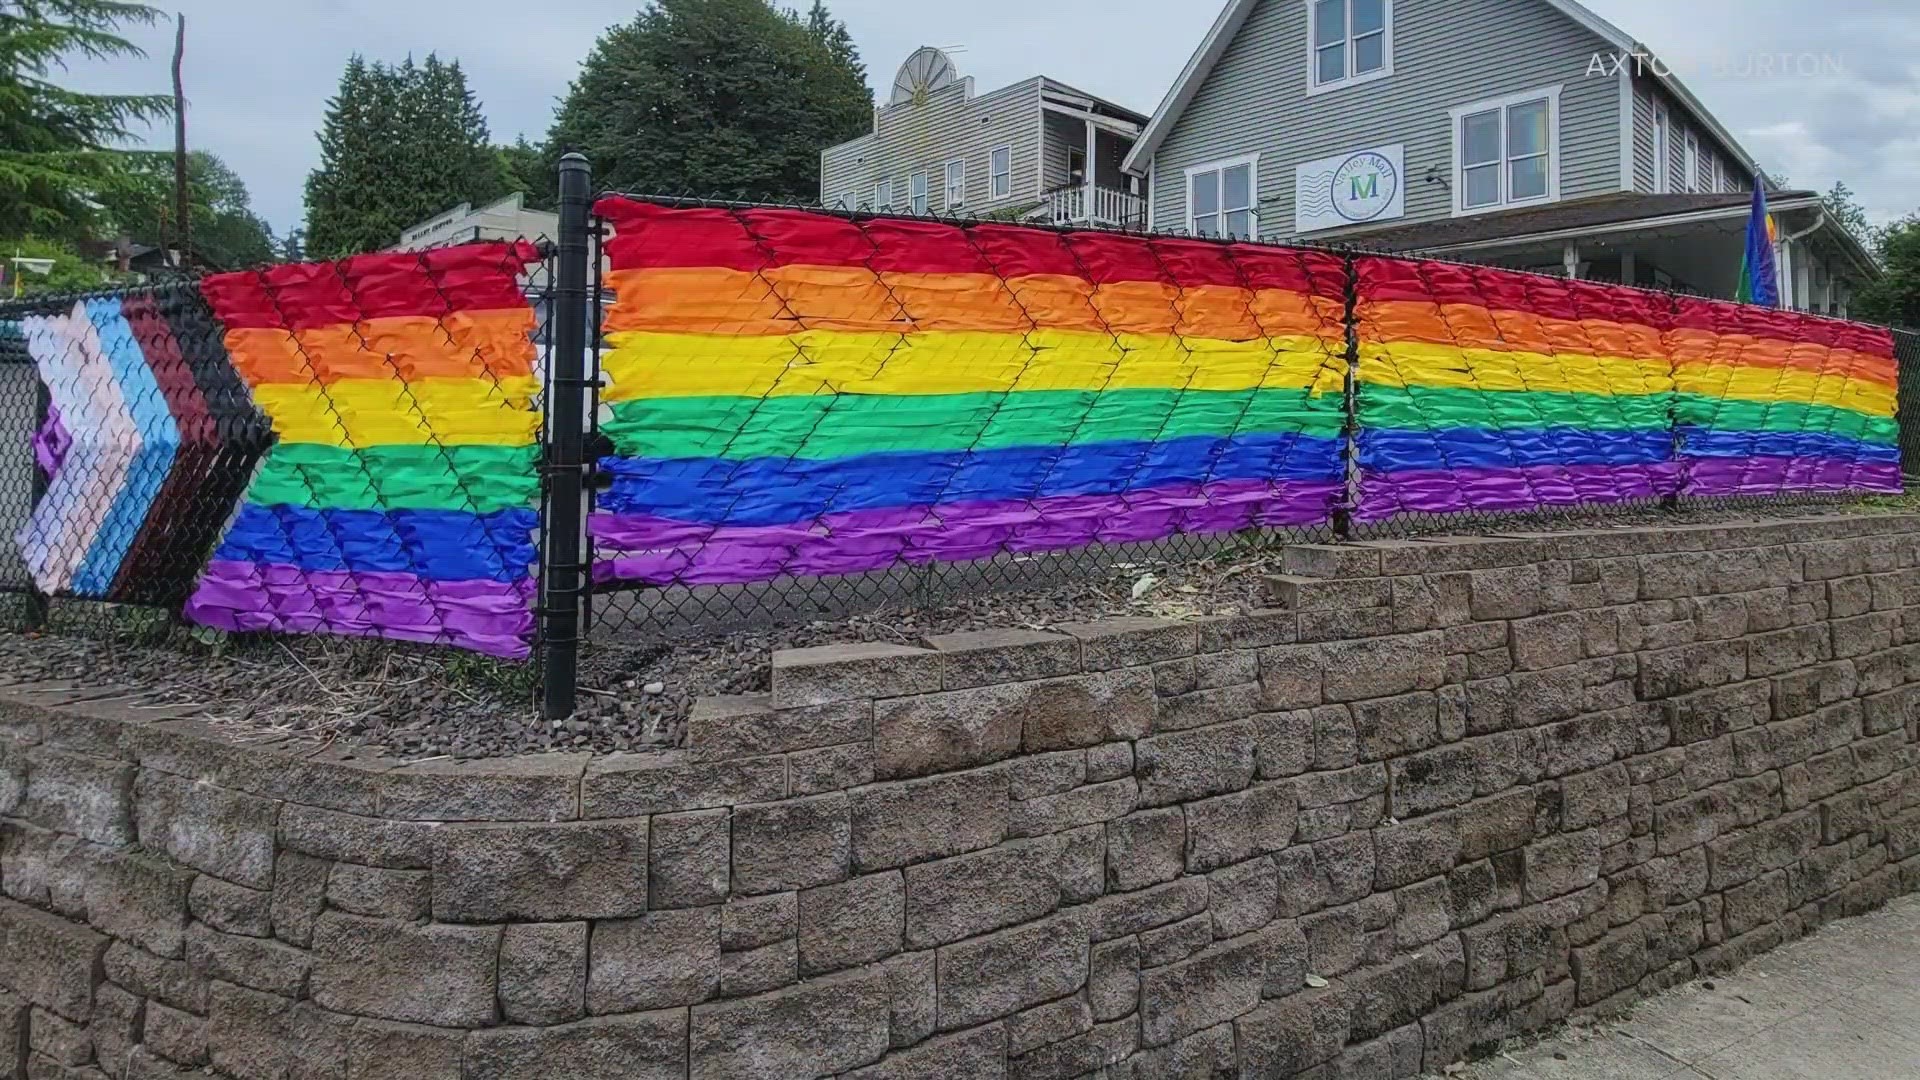 The LGBTQ+ art installation had greeted people coming and going from Duvall for more than a year.